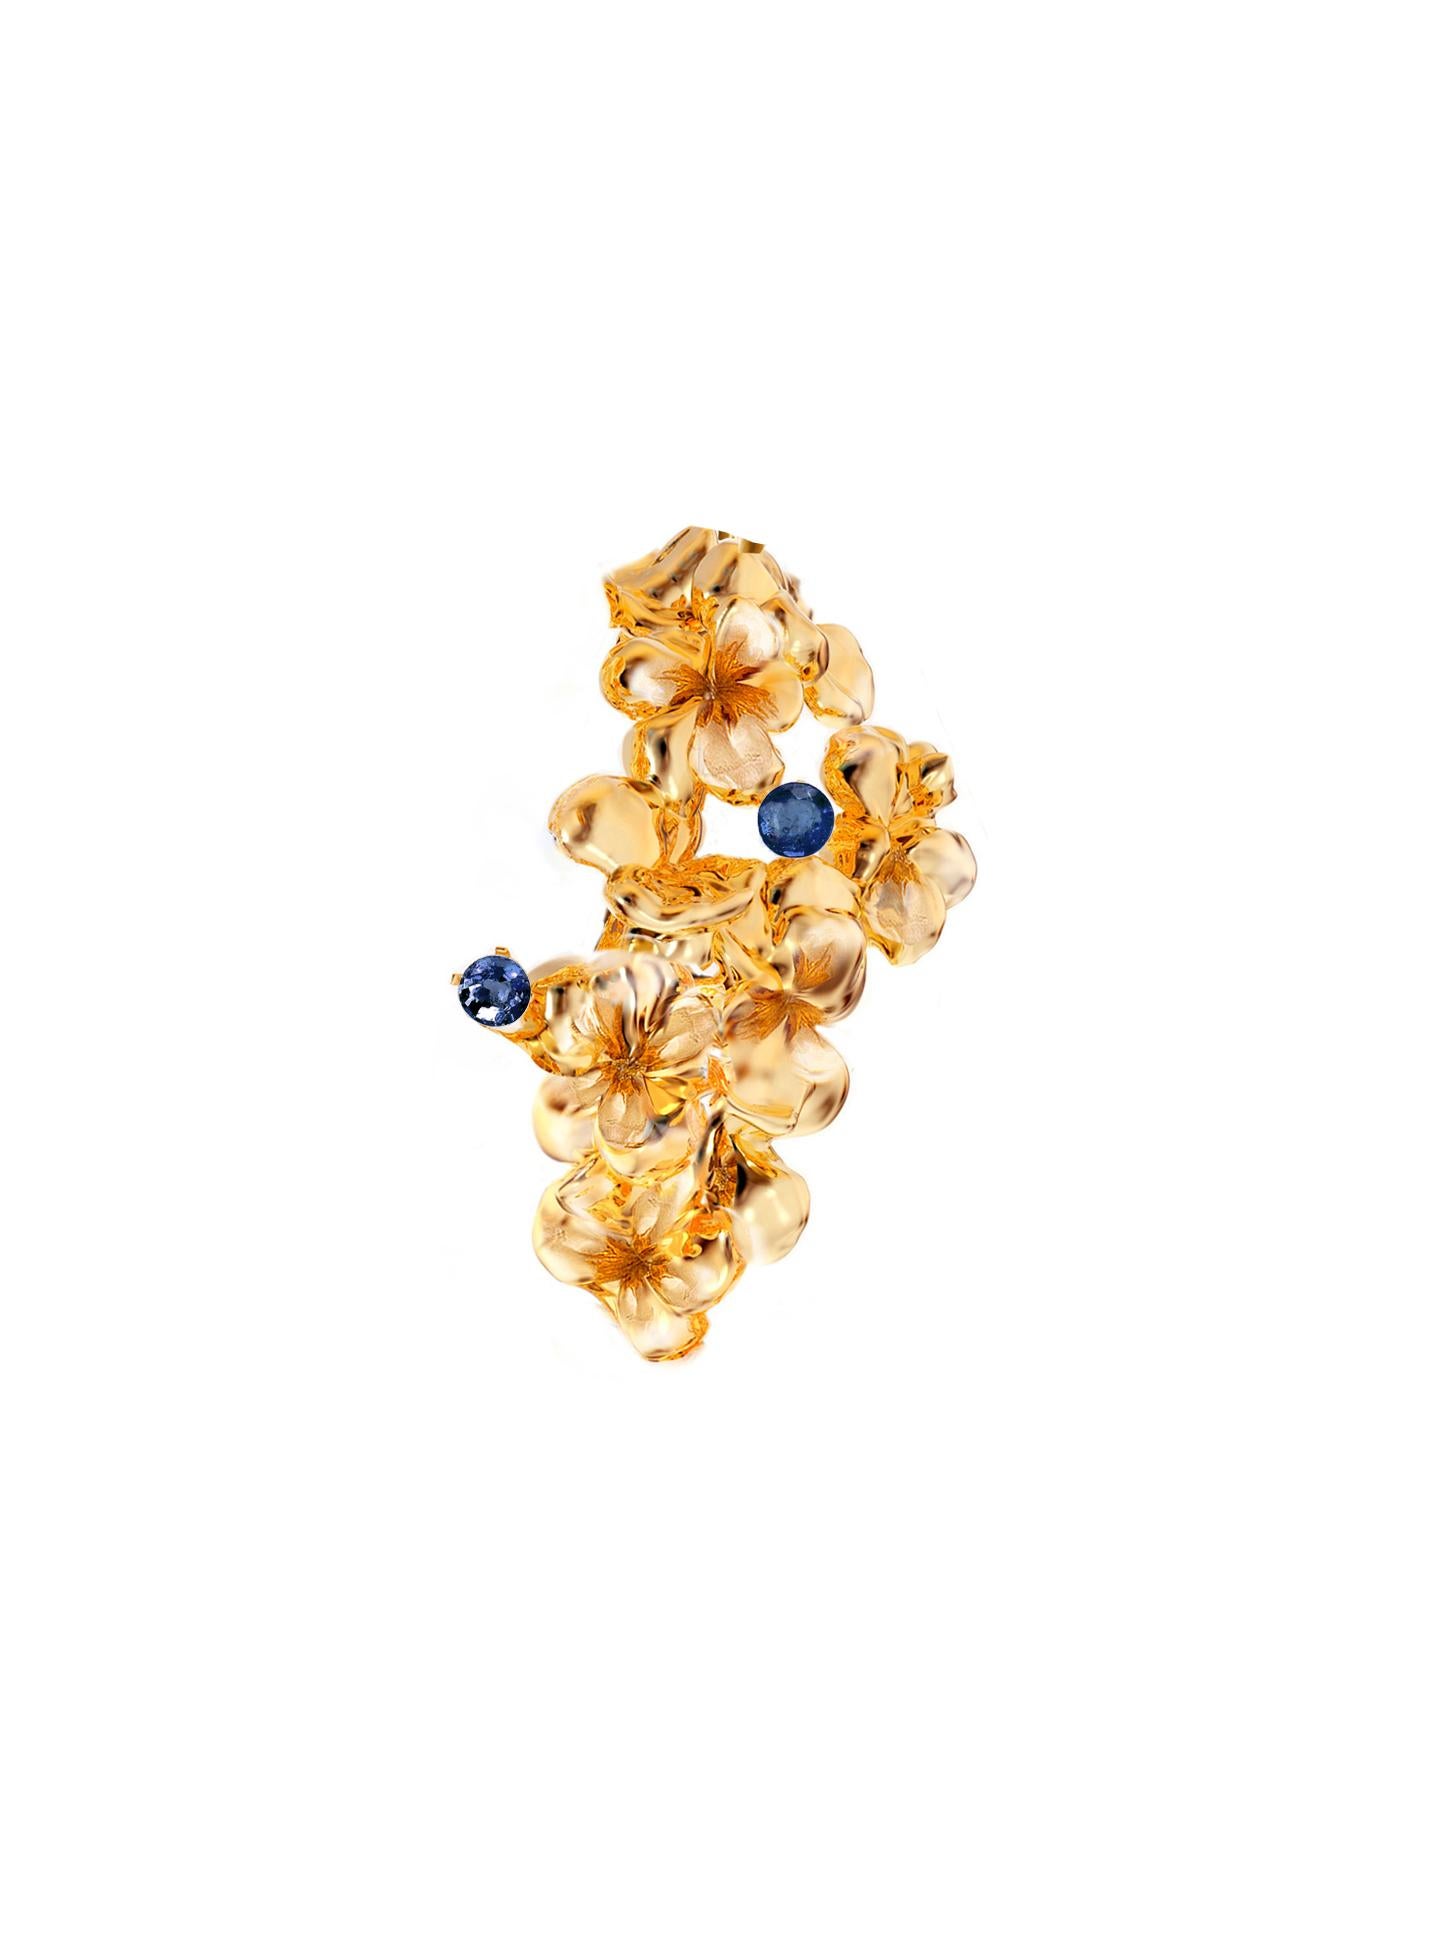 This contemporary Hortensia clip-on Sculptural earrings are in 18 karat yellow gold with round natural sapphires. The abstract sculptural design adds the extra highlights to the surface of the gold. The gems add the delicate blinks of colour. This